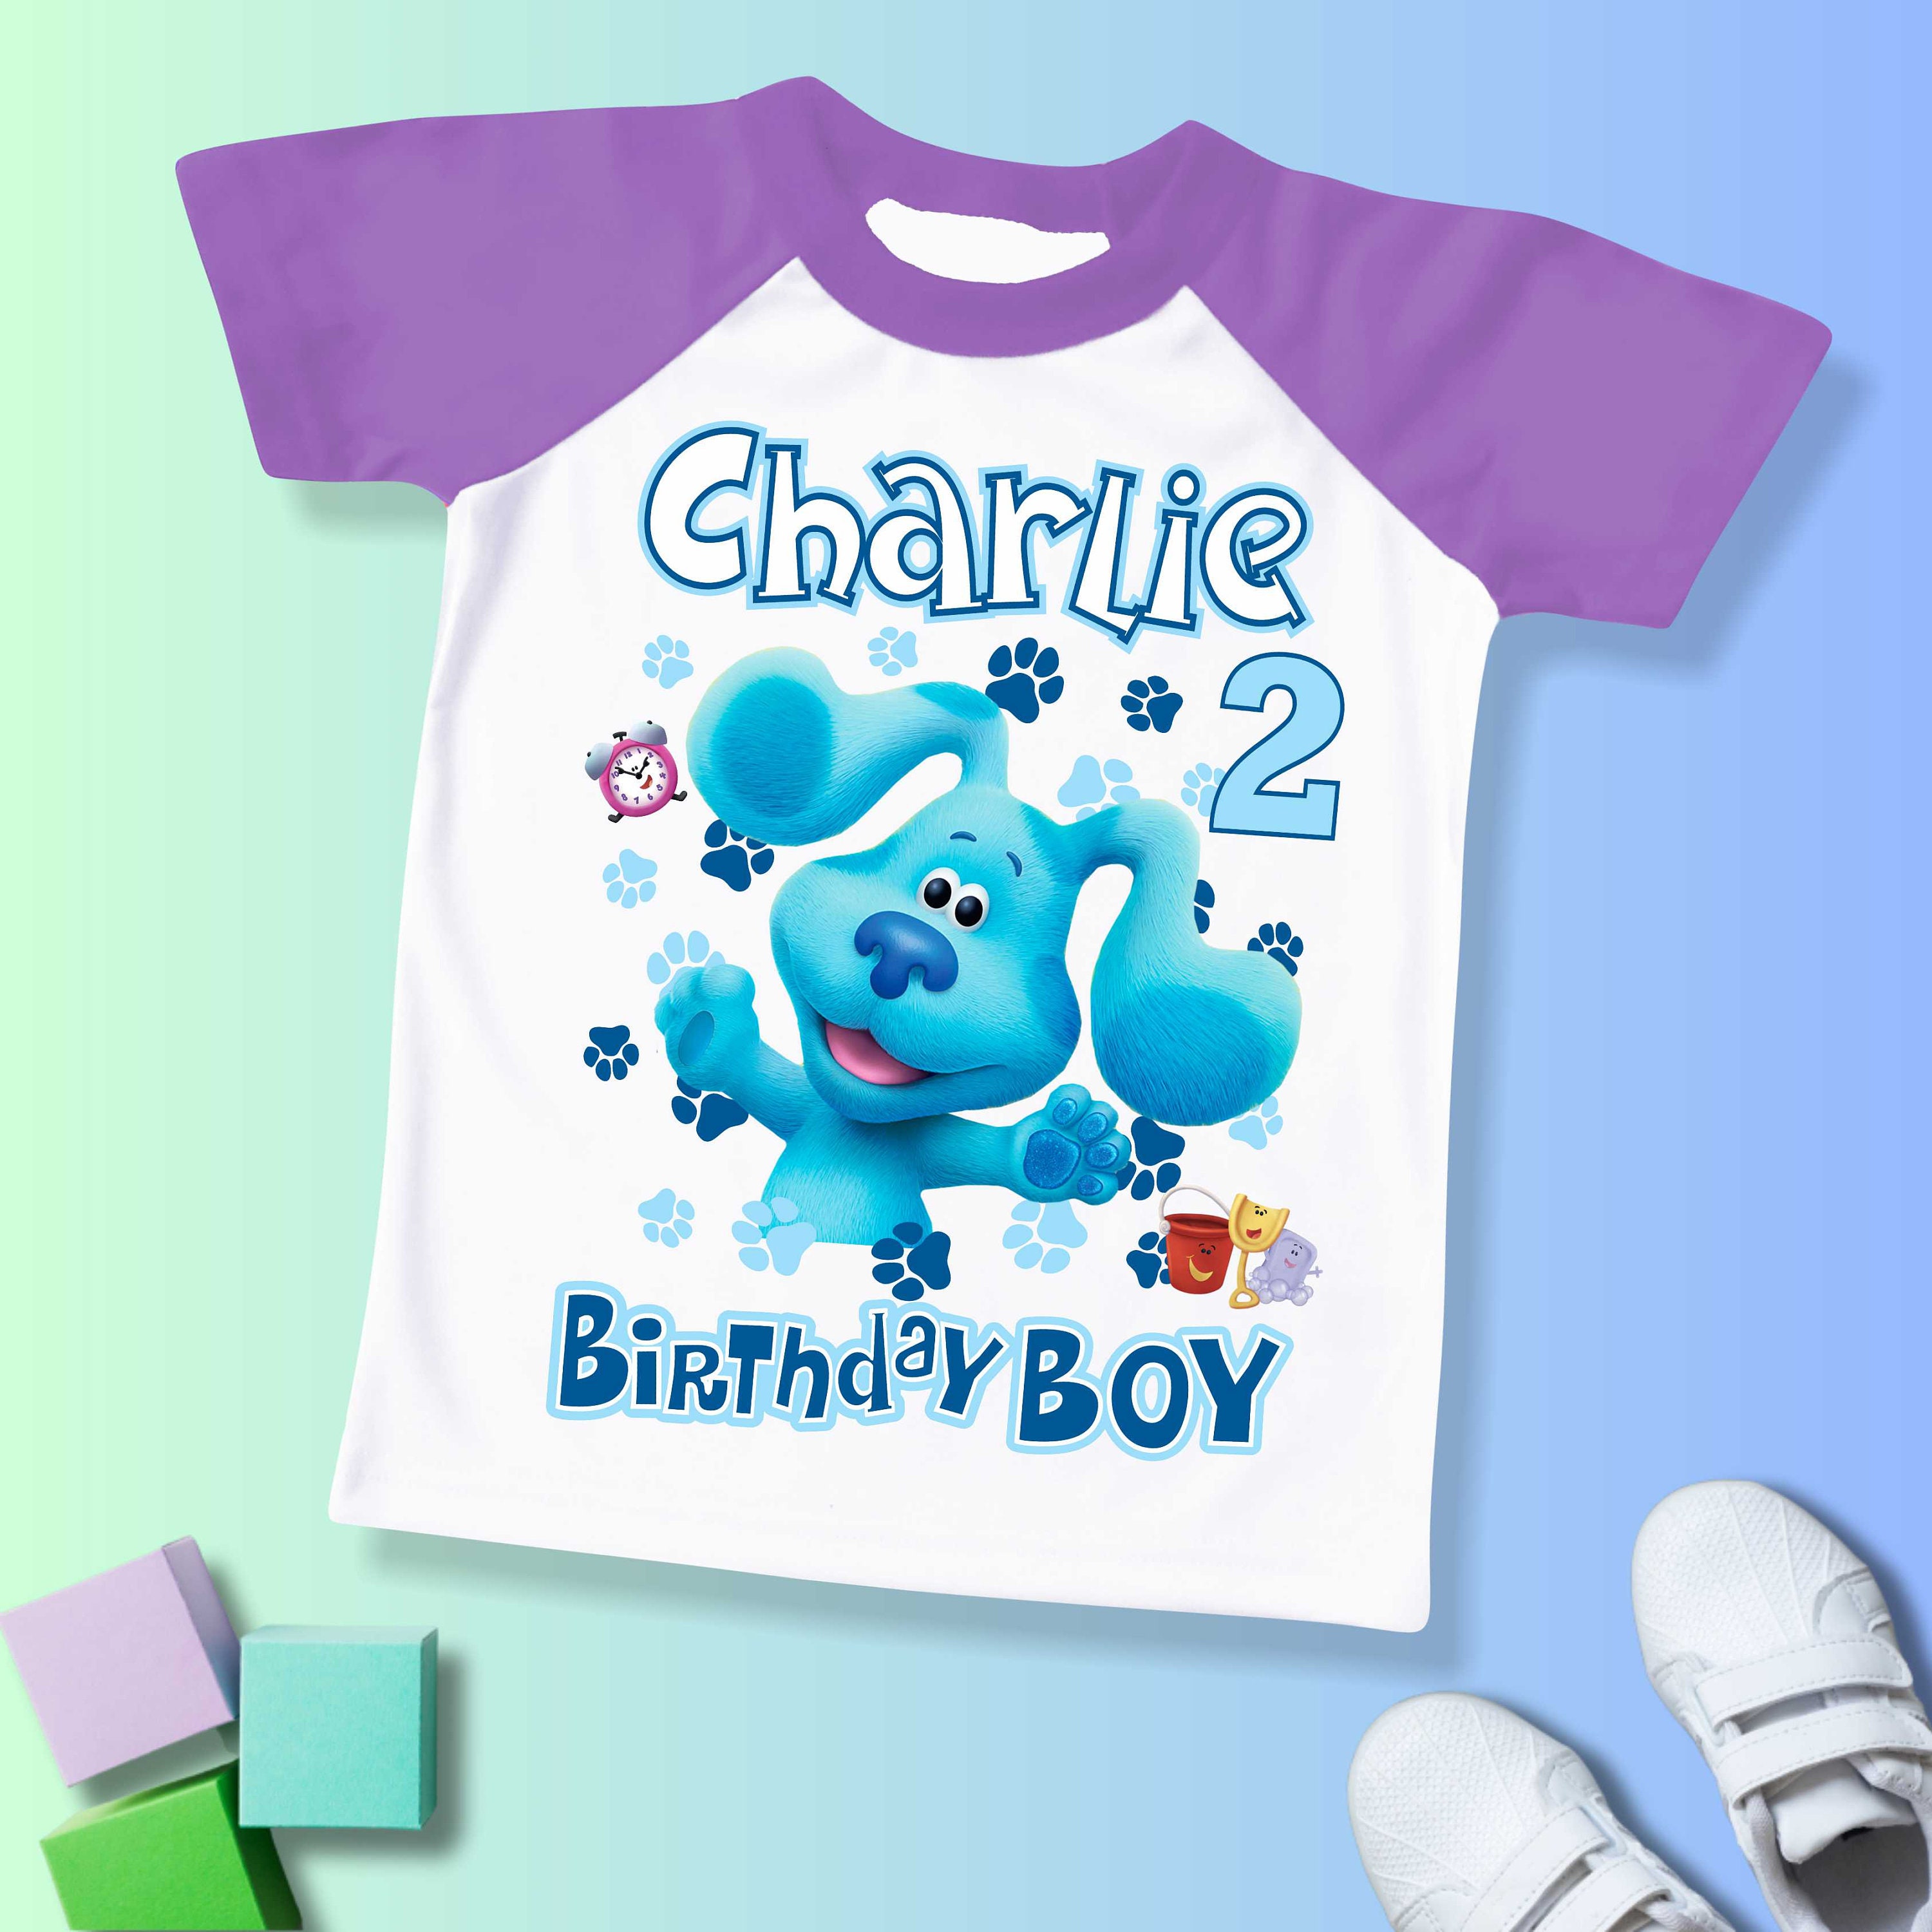 Discover Blue Dog Inspired Birthday T Shirt, Blue Funny Dog theme Party, Blue Dog Personalized shirt kids, Gift Birthday Shirt, family tees Custom